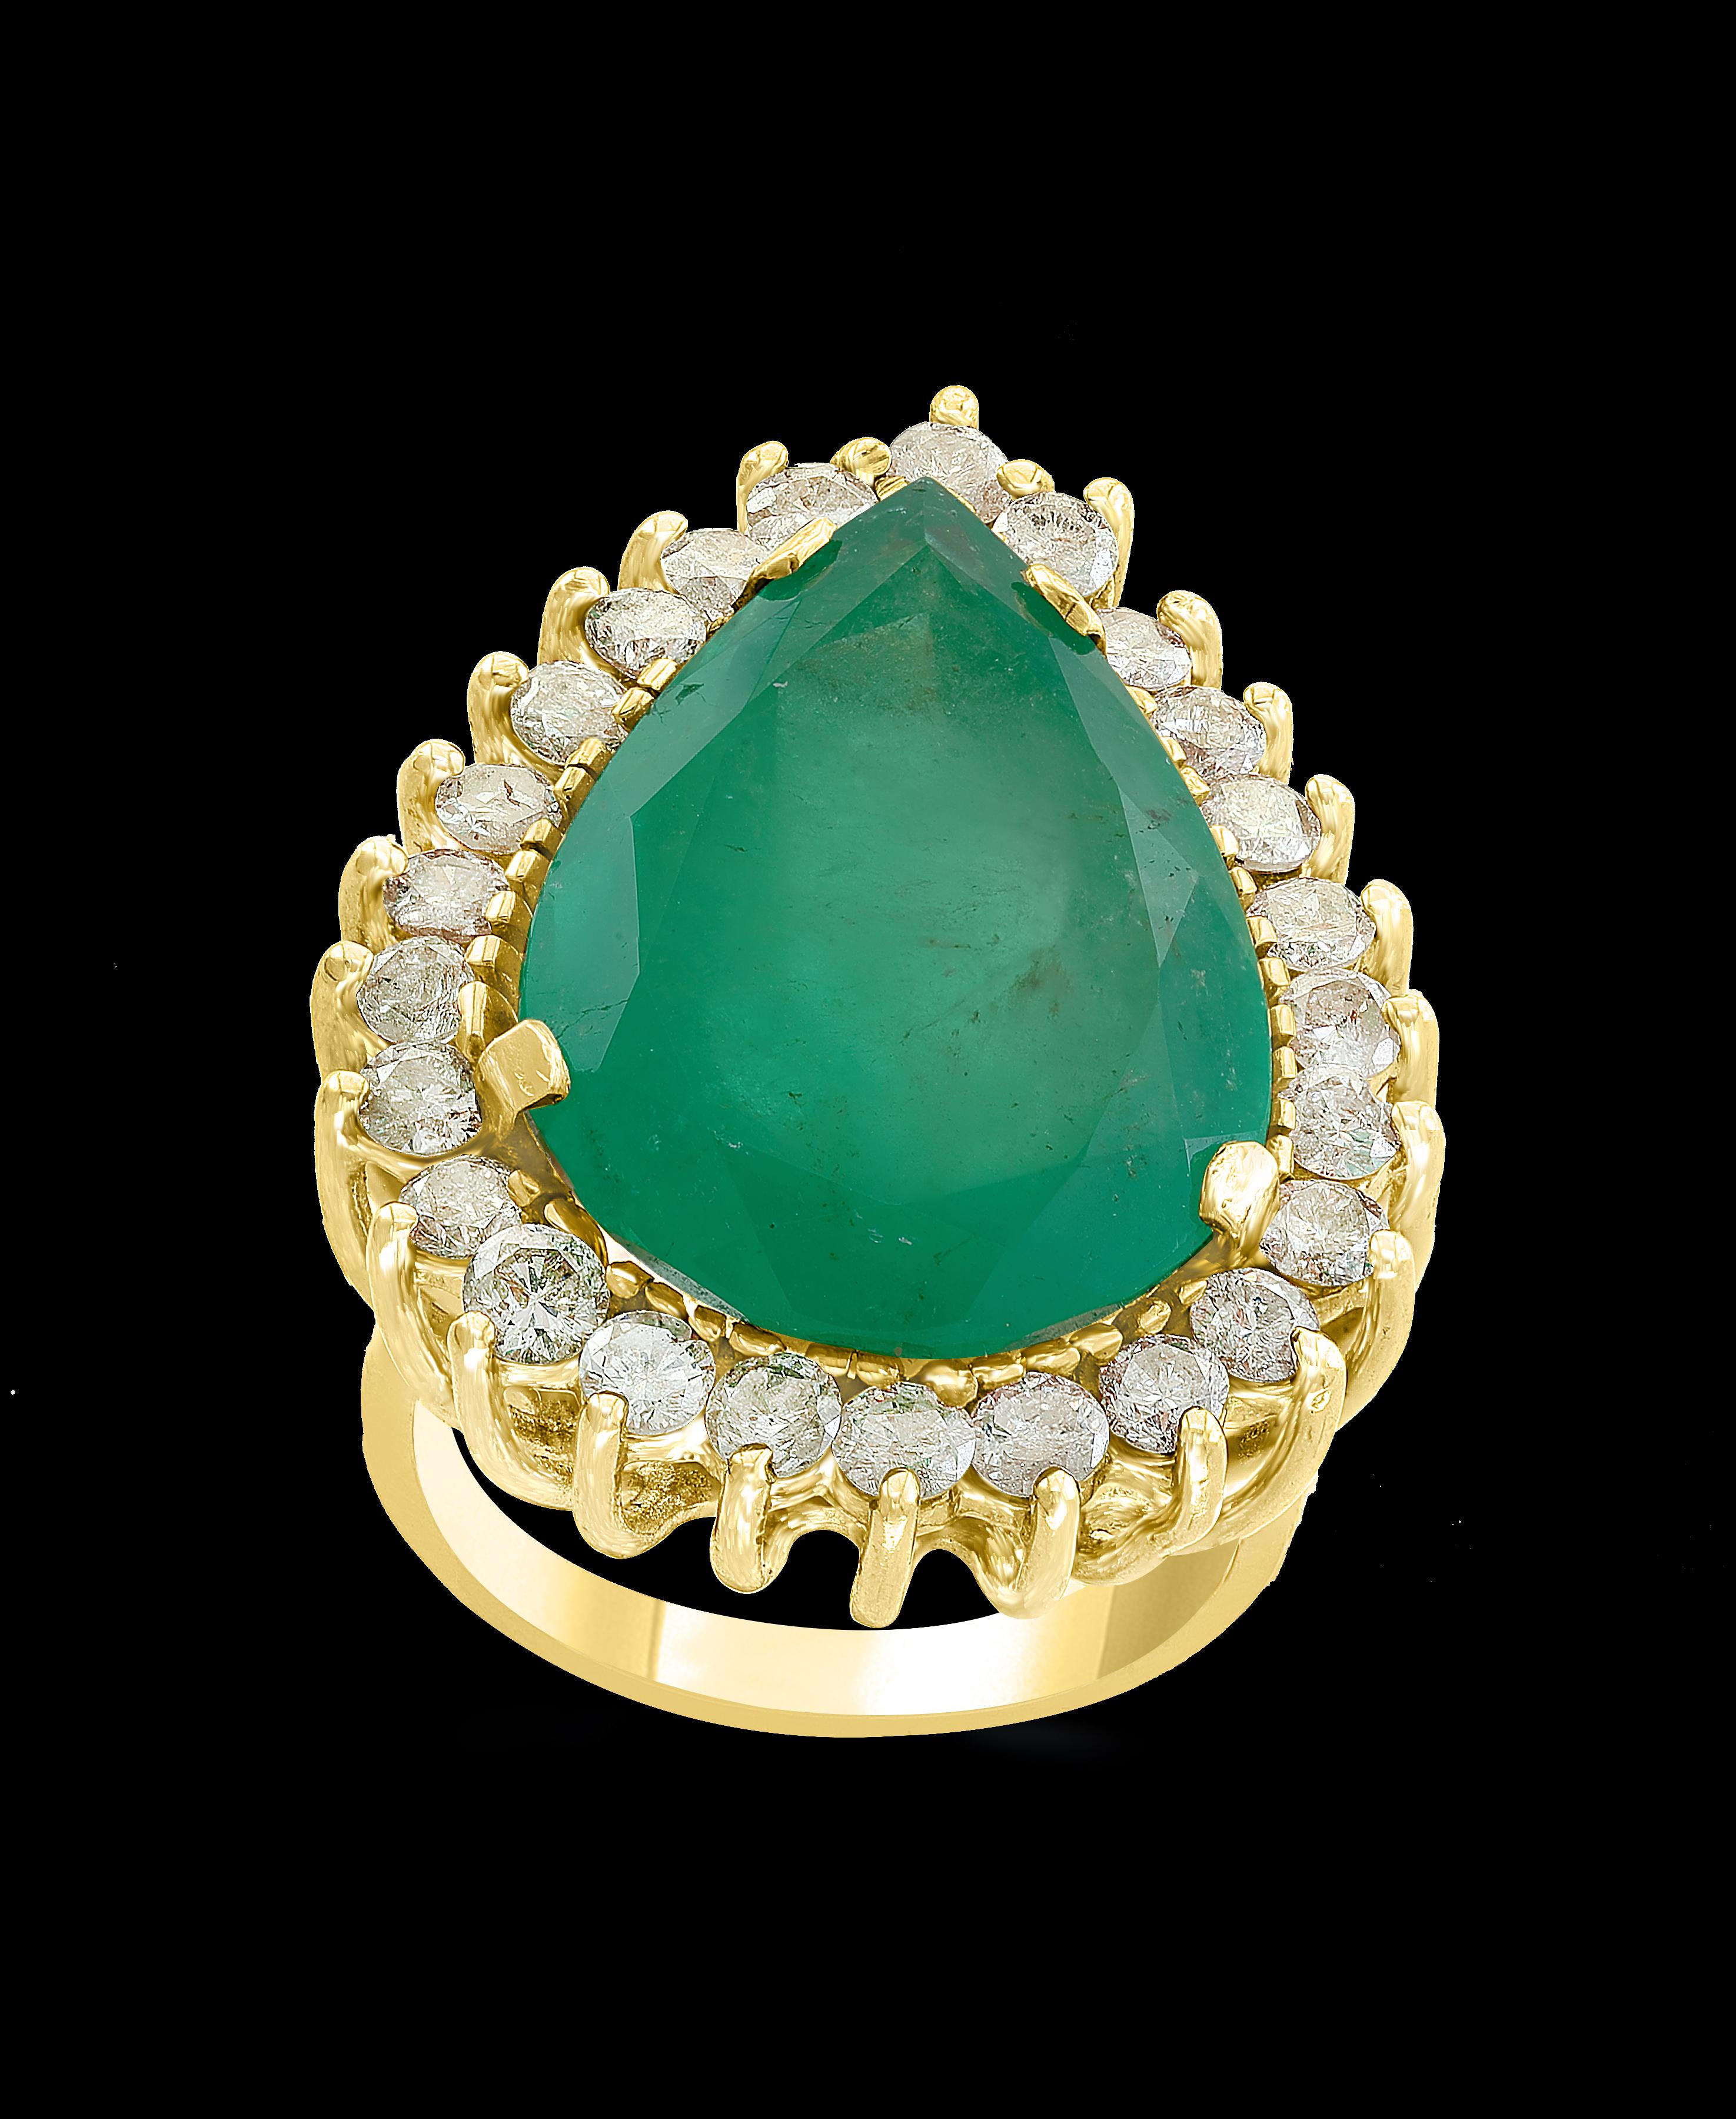 A classic, Cocktail ring 
16 Carat Pear shape  Emerald and Diamond Ring,  with no color enhancement.
14 Karat Yellow gold 11 gm
 Diamonds: approximate 3.0 Carat 
Emerald:  approximate 16 Carat 
Cut: Pear shape
Ring size 6.5
It’s very hard to capture